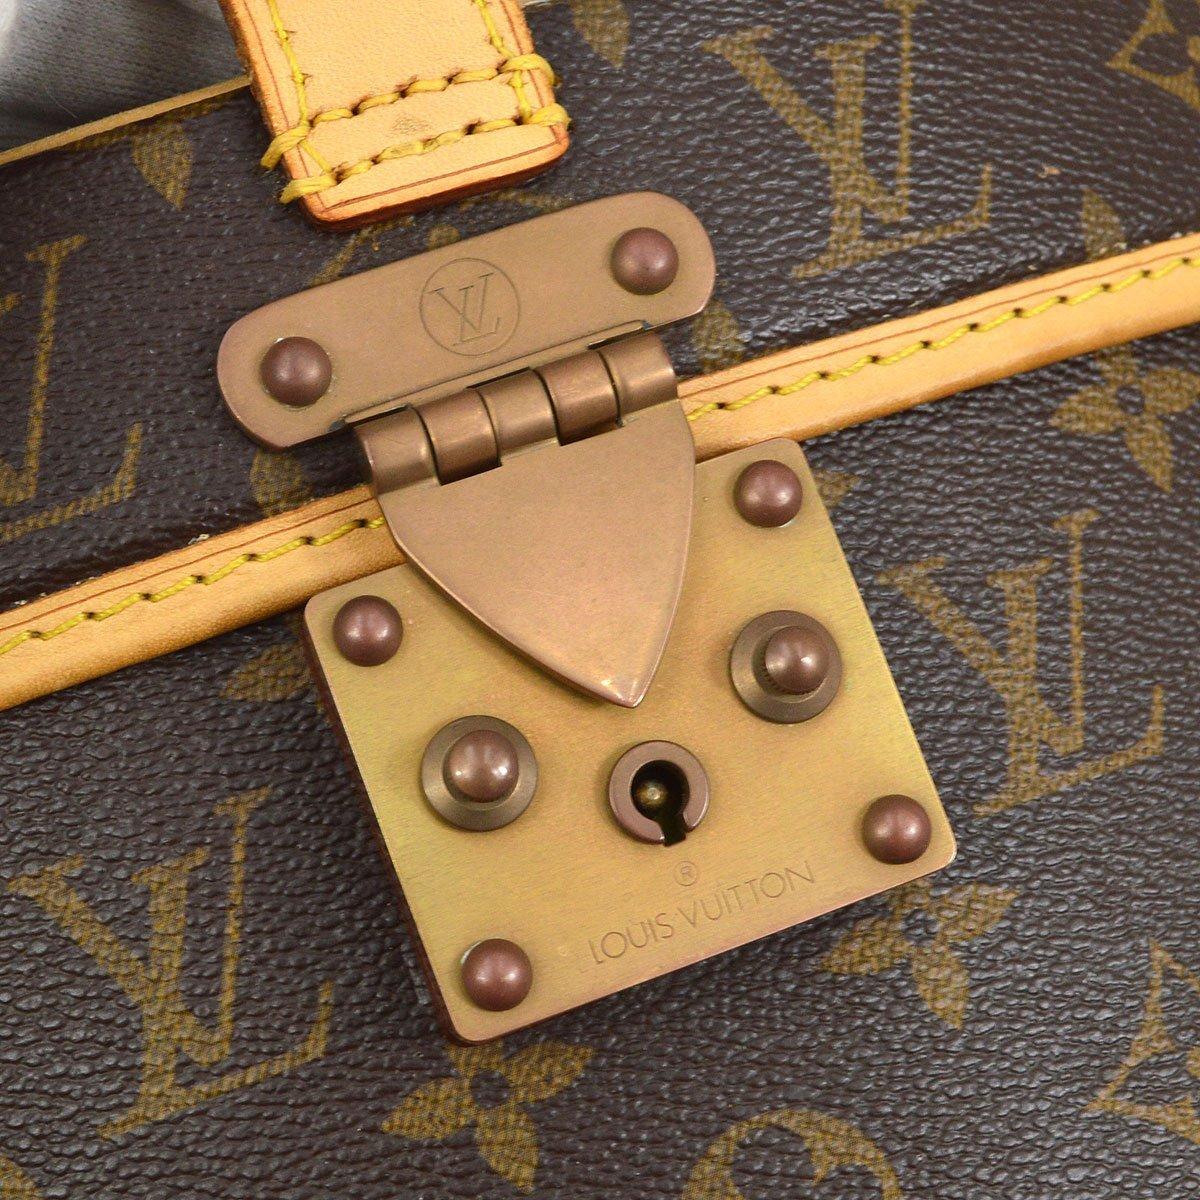 Pre-Owned Vintage Condition
From 2010 Collection
Monogram Canvas
Leather Trim
Gold Tone Hardware
Woven Lining
Measures 15.75